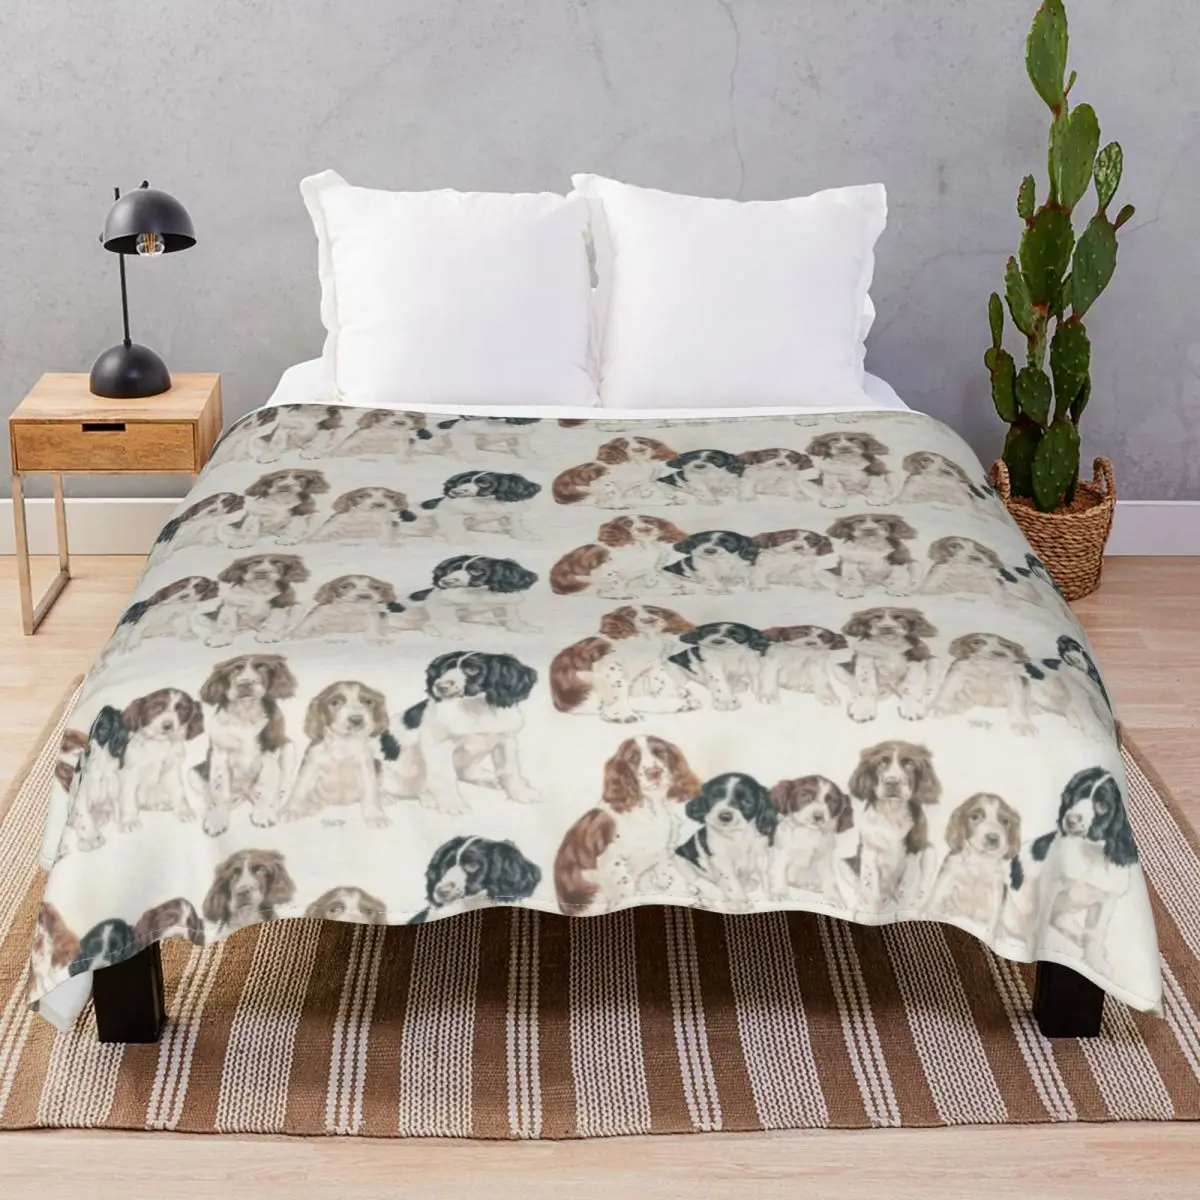 

English Springer Spaniel Puppies Blankets Velvet Autumn/Winter Portable Throw Blanket for Bed Home Couch Camp Office